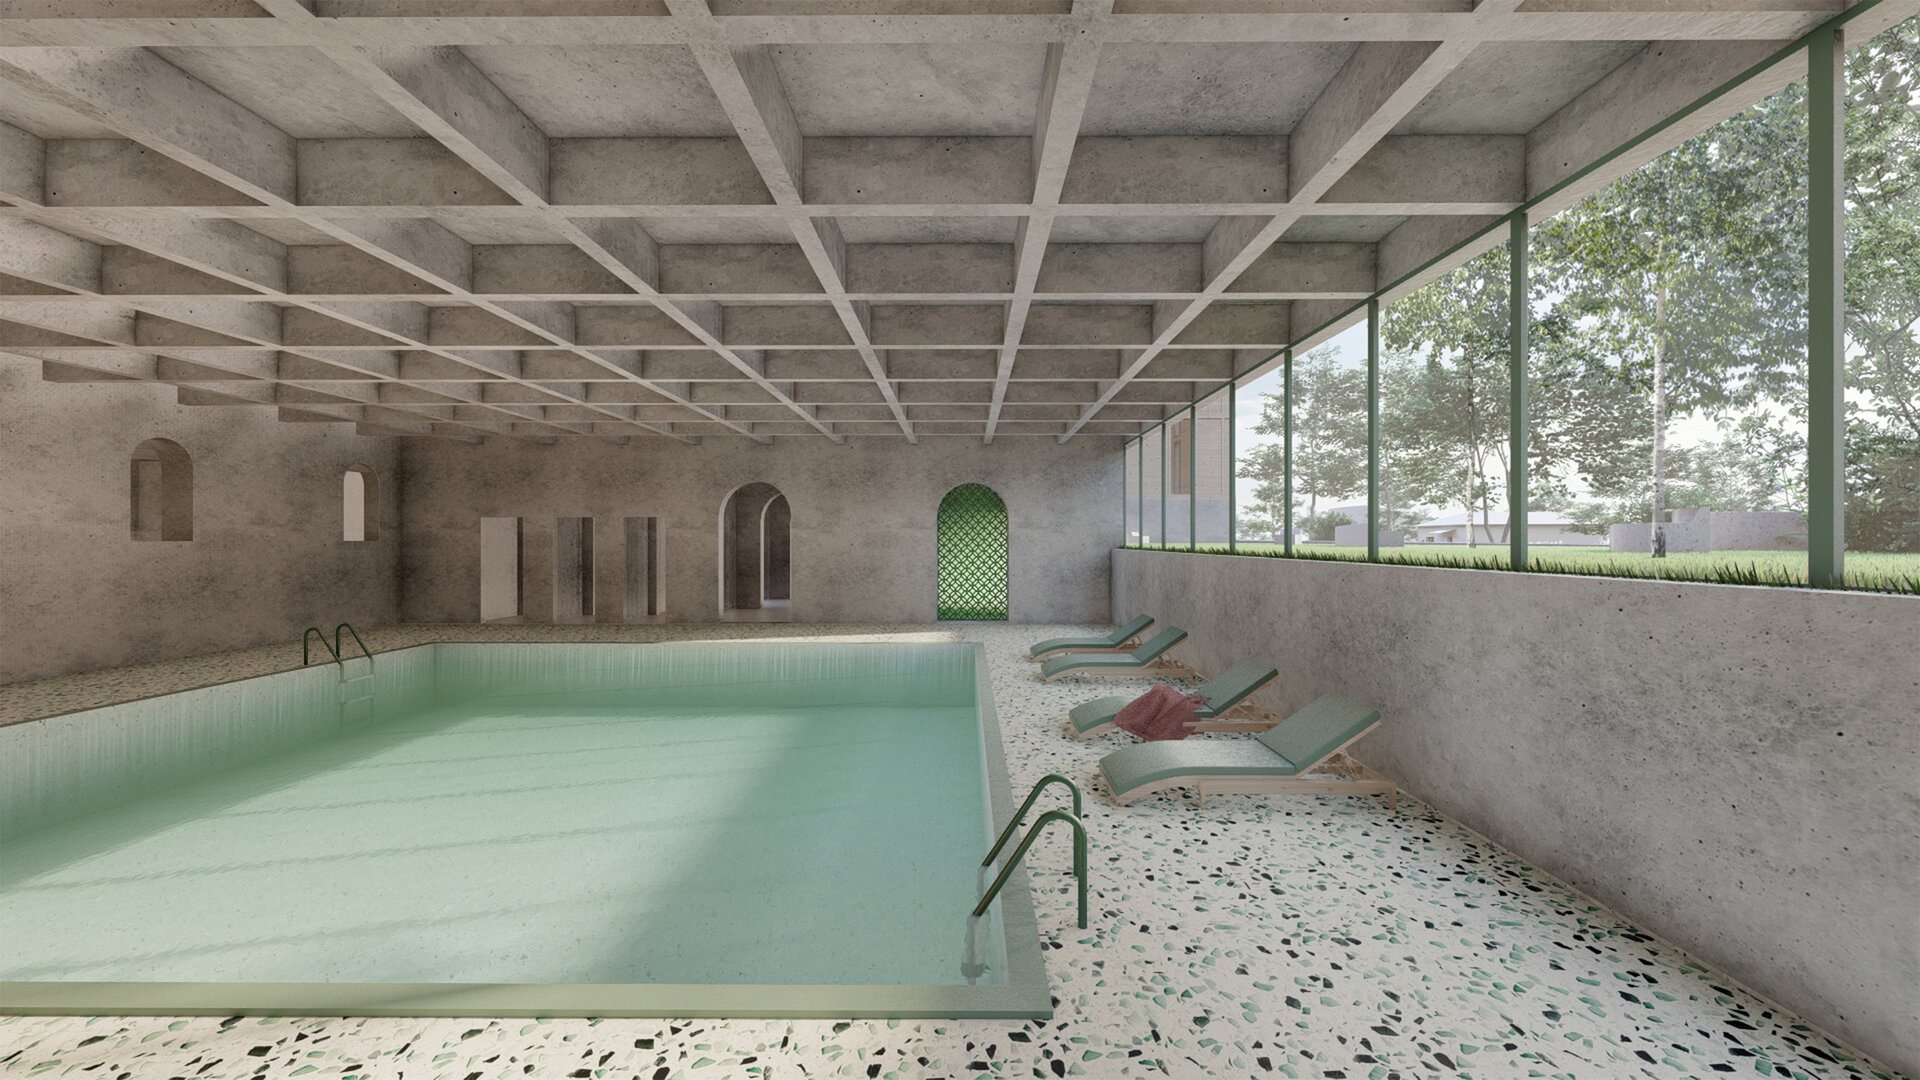 Center for treatment and relaxation. The revitalisation of Sărata Monteoru spa resort